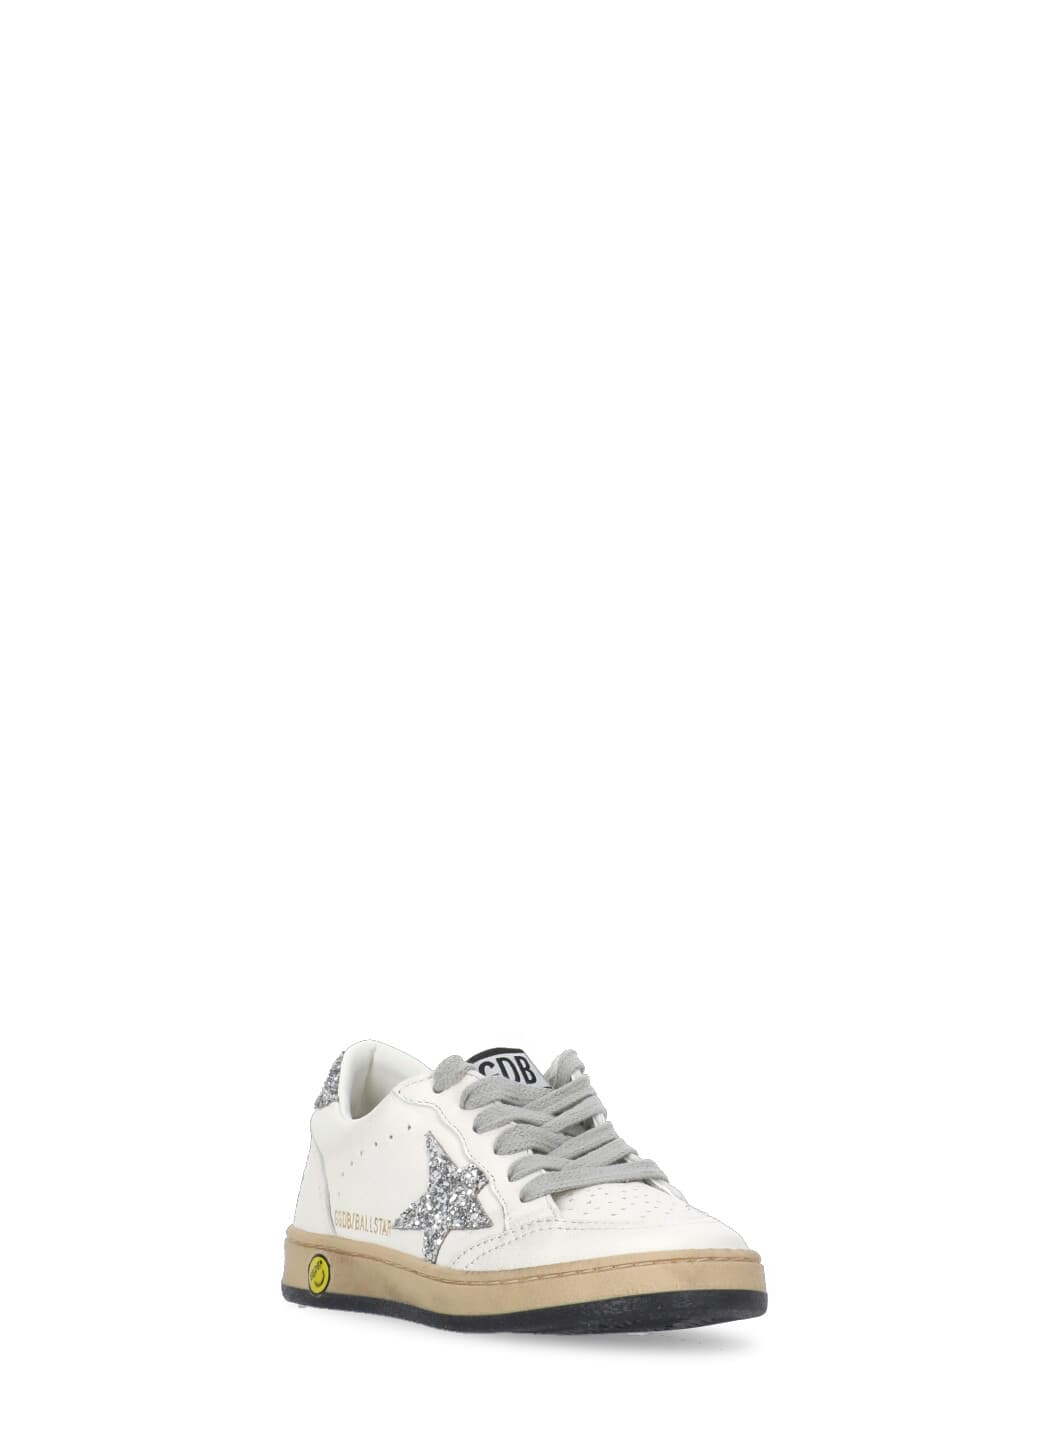 Shop Golden Goose Ball Star New Sneakers In White